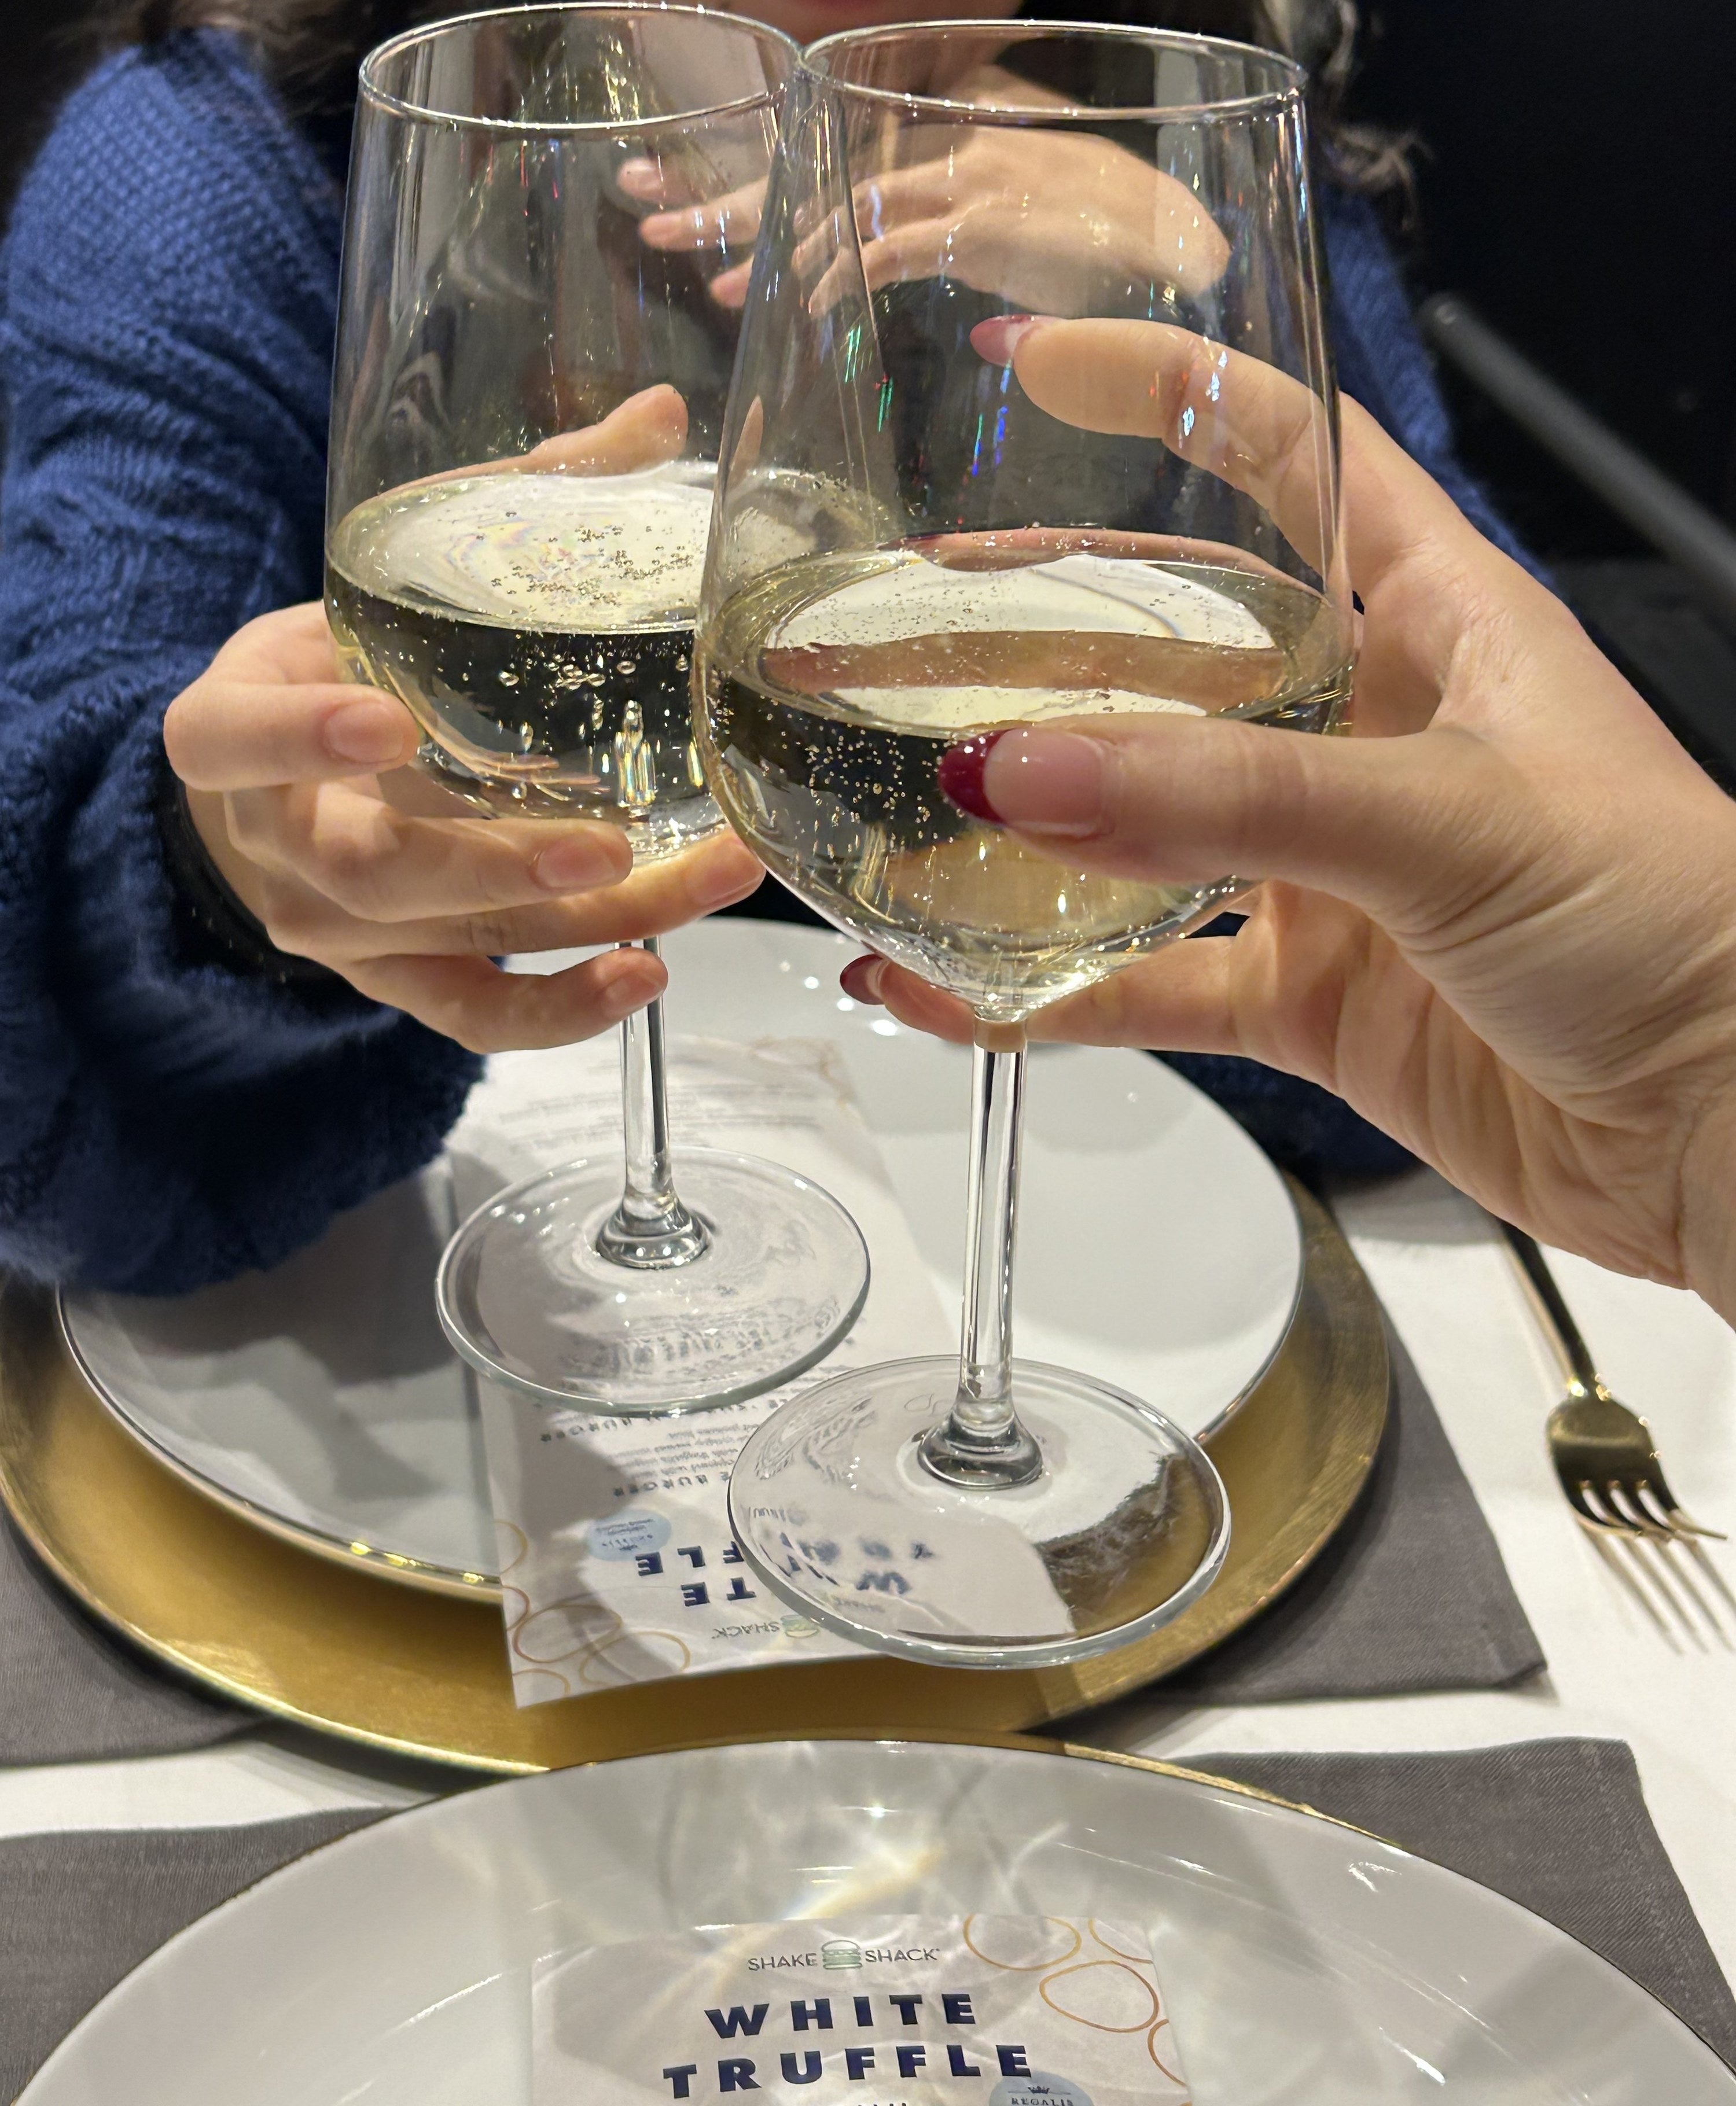 Two people touching wine glasses at a table